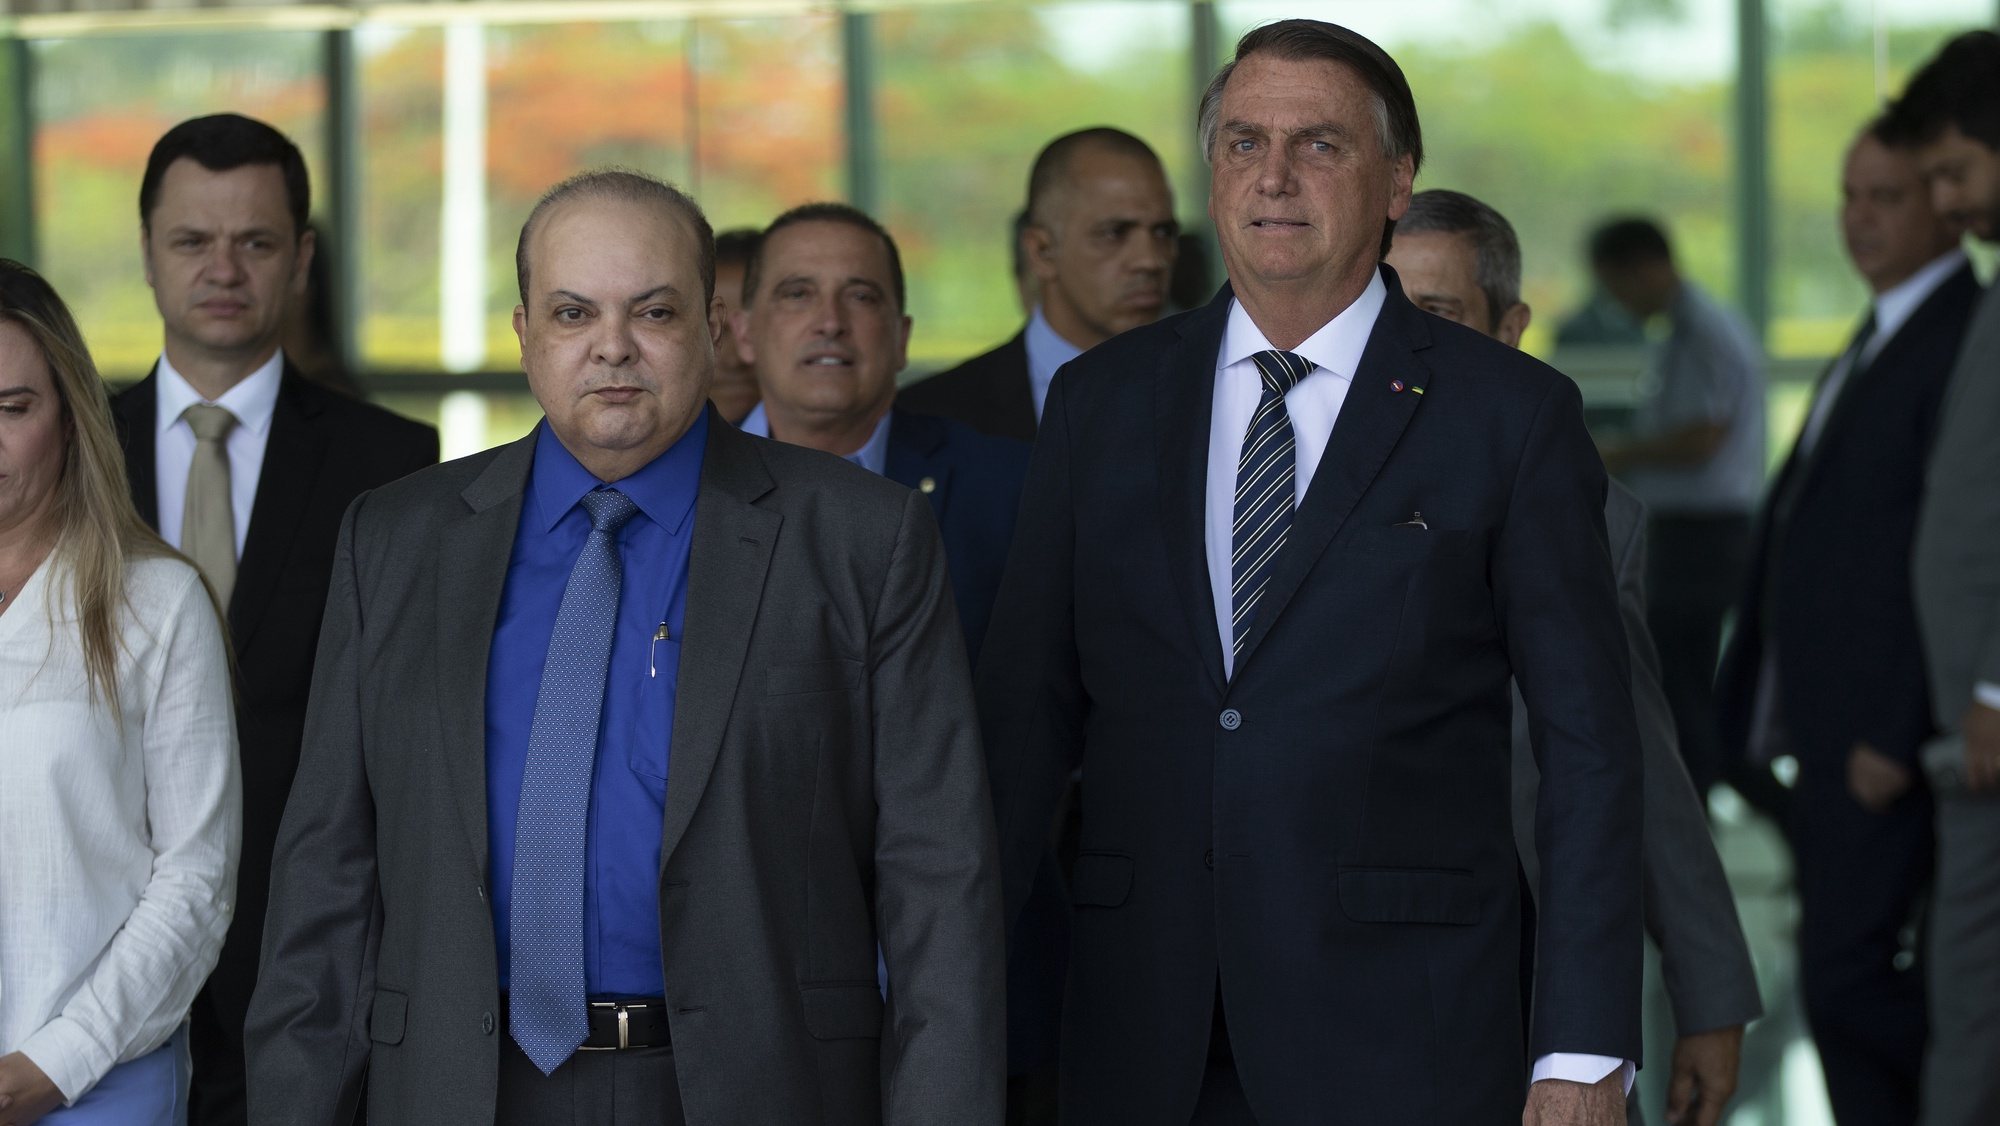 epa10225034 The president of Brazil and candidate for re-election, Jair Bolsonaro (R), and the governor-elect of Brasilia, Ibaneis Rocha (L), participate in a press conference, in the Palacio da Alvorada, in Brasilia, Brazil, 05 October 2022. Bolsonaro will face Former Brazilian President Luiz Inacio Lula da Silva (PT) in the second round of the presidential elections on 30 October. Together, Lula and Bolsonaro received 108 million votes (91.6%). According to the Superior Electoral Court (TSE), in the first round, Lula obtained 57 million votes (48.4%) and Bolsonaro, 51 million votes (43.2%).  EPA/Joedson Alves